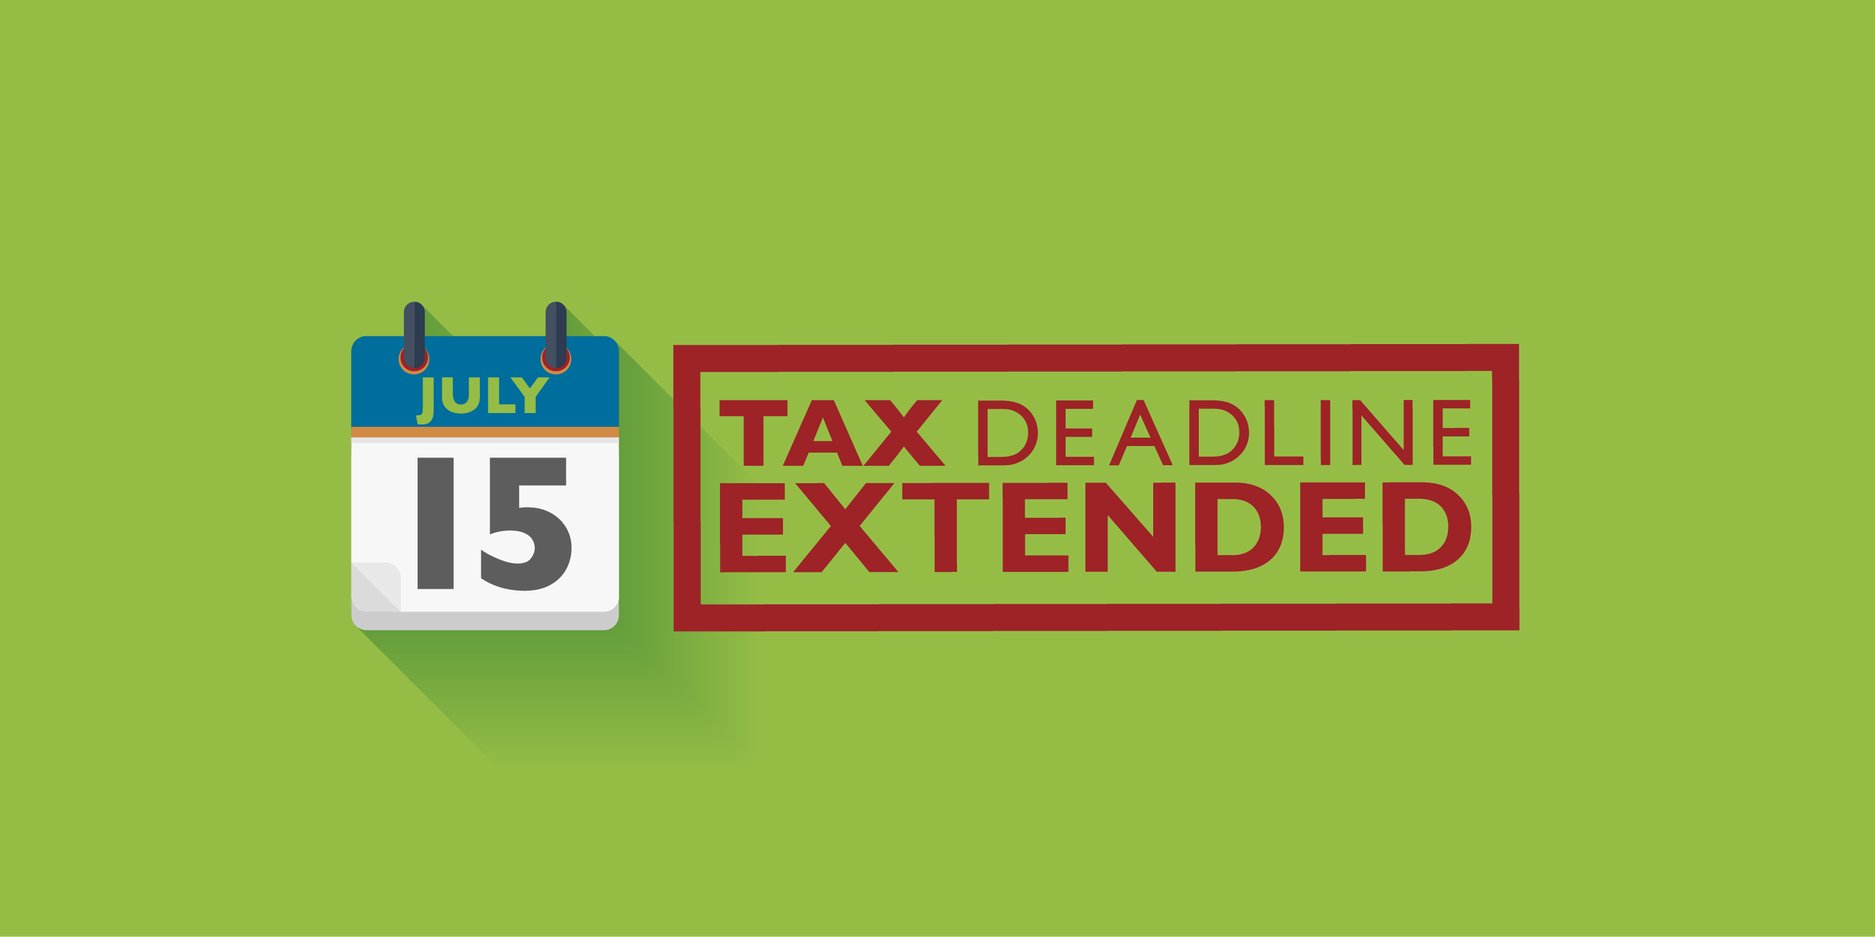 Federal tax filing due July 15